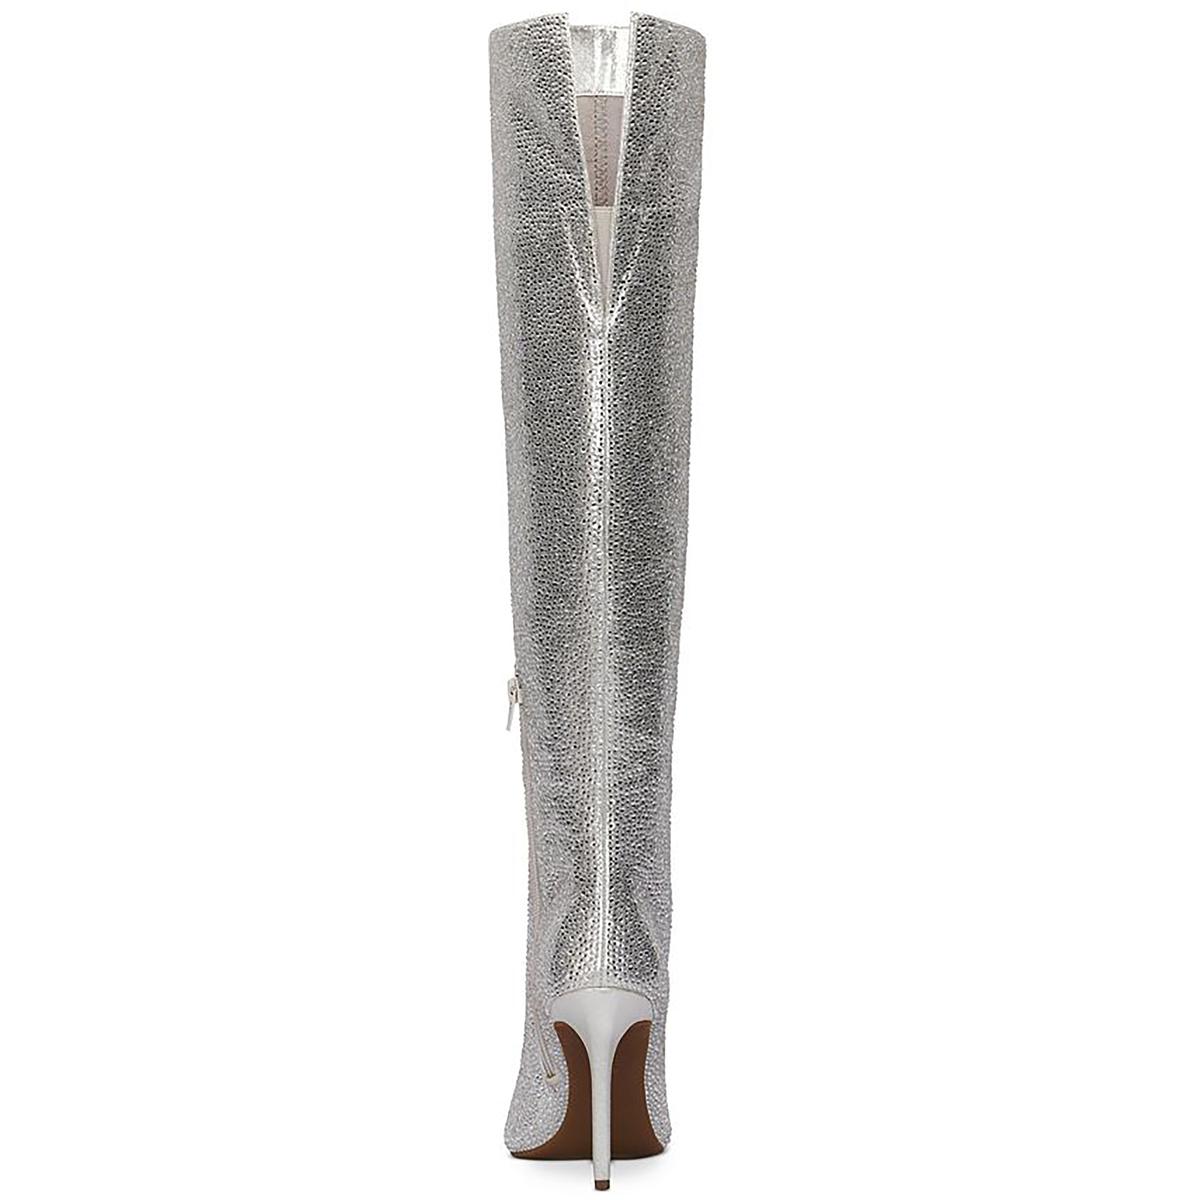 25 of My Favorite Tall Boots This Season - Glitter, Inc.